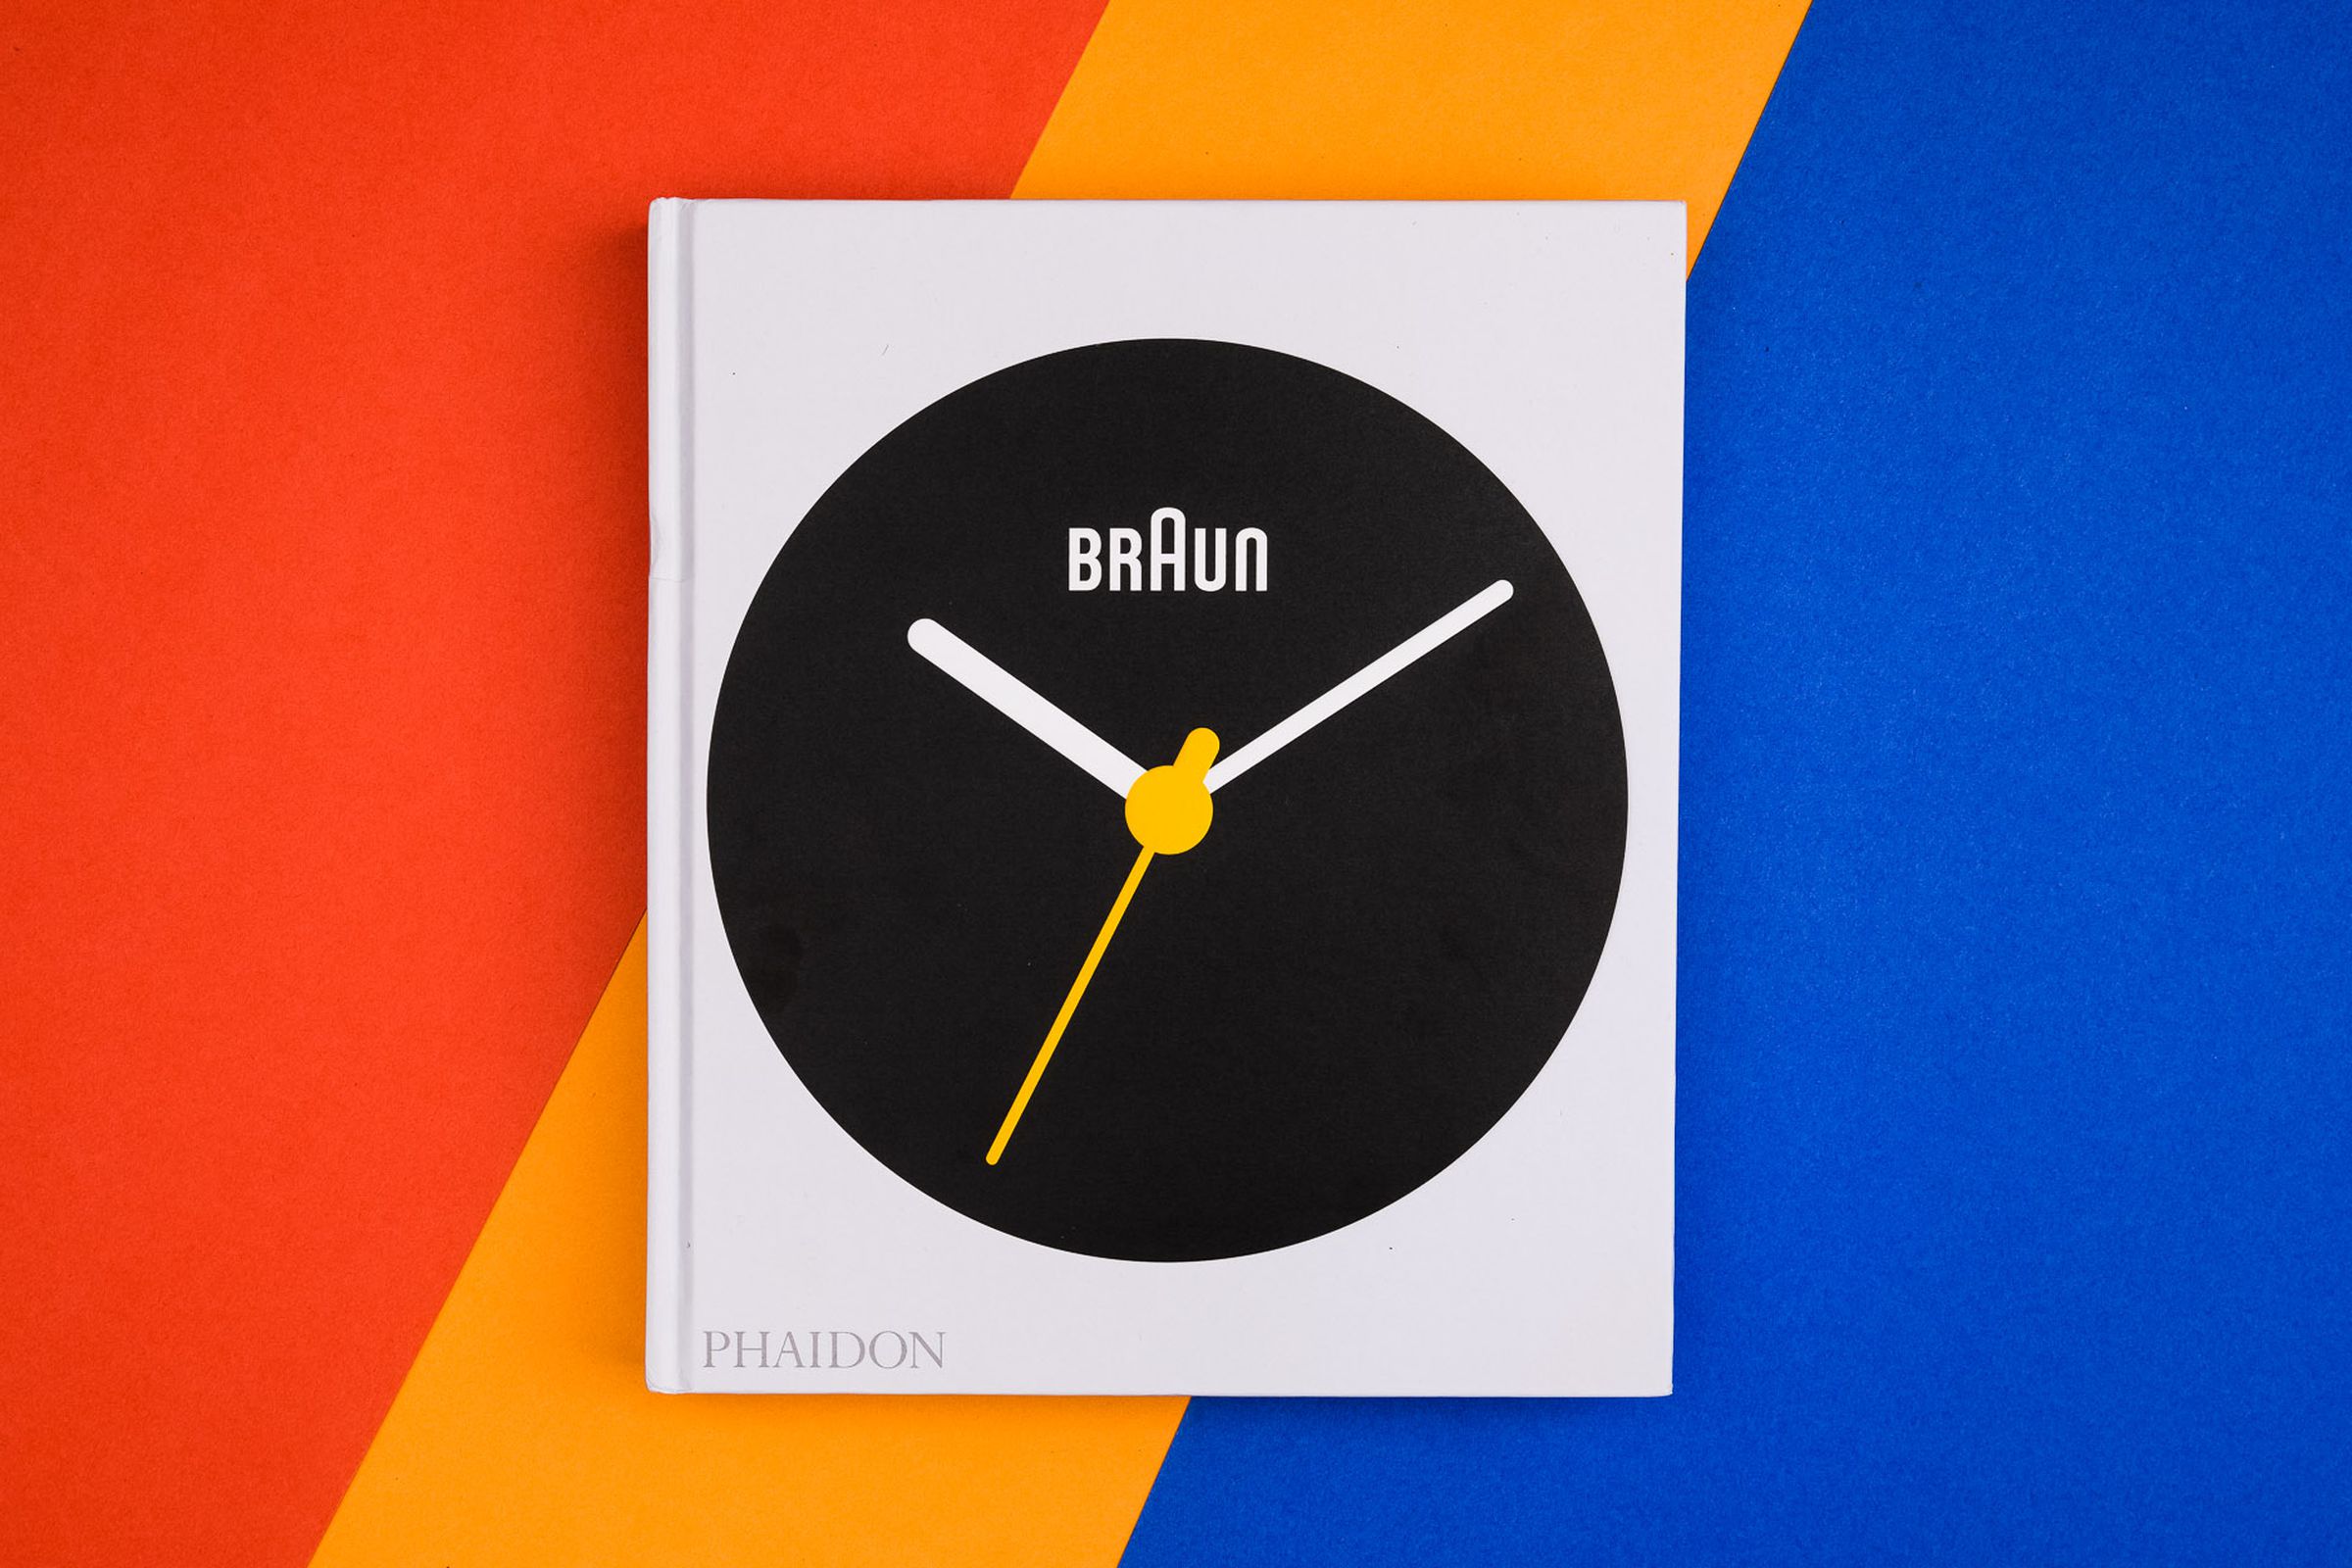 Photo of the cover of the book Braun: Designed to Keep, which features a large black Braun watchface with orange minute hand on white background. The book sits flat on a diagonally striped red, orange and blue table.